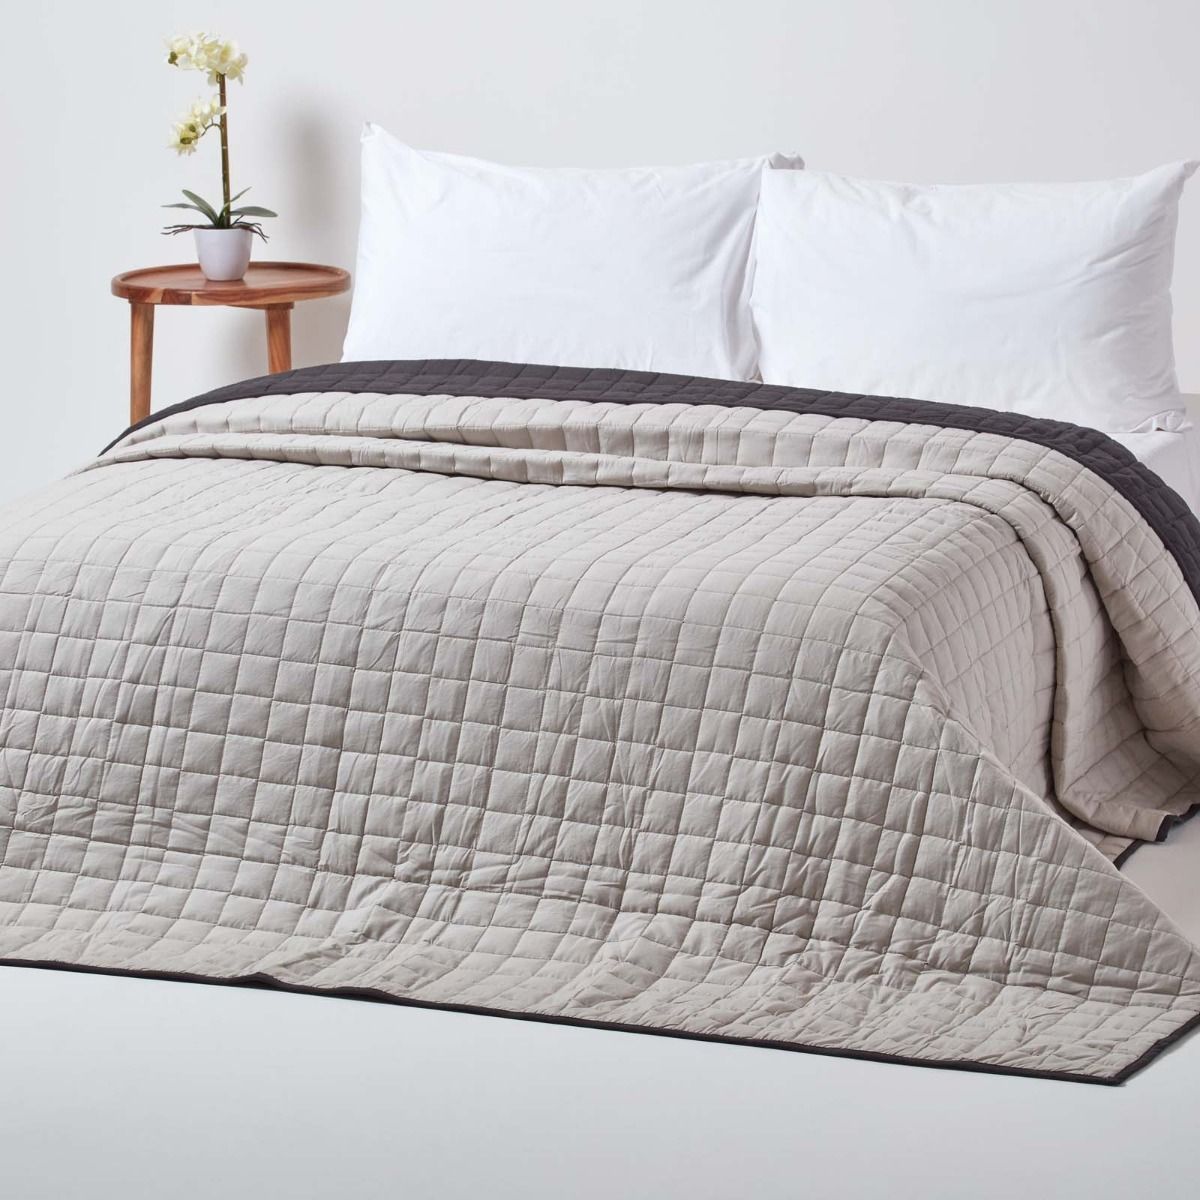 Oversize Queen Box Stitch White Color Quilted Bedspread Coverlet 100 by 106 inches Plus 2 Standard Shams 20 by 26 inch Breathable Fade,Stain,Shrink,Wrinkle Resistant Reversible